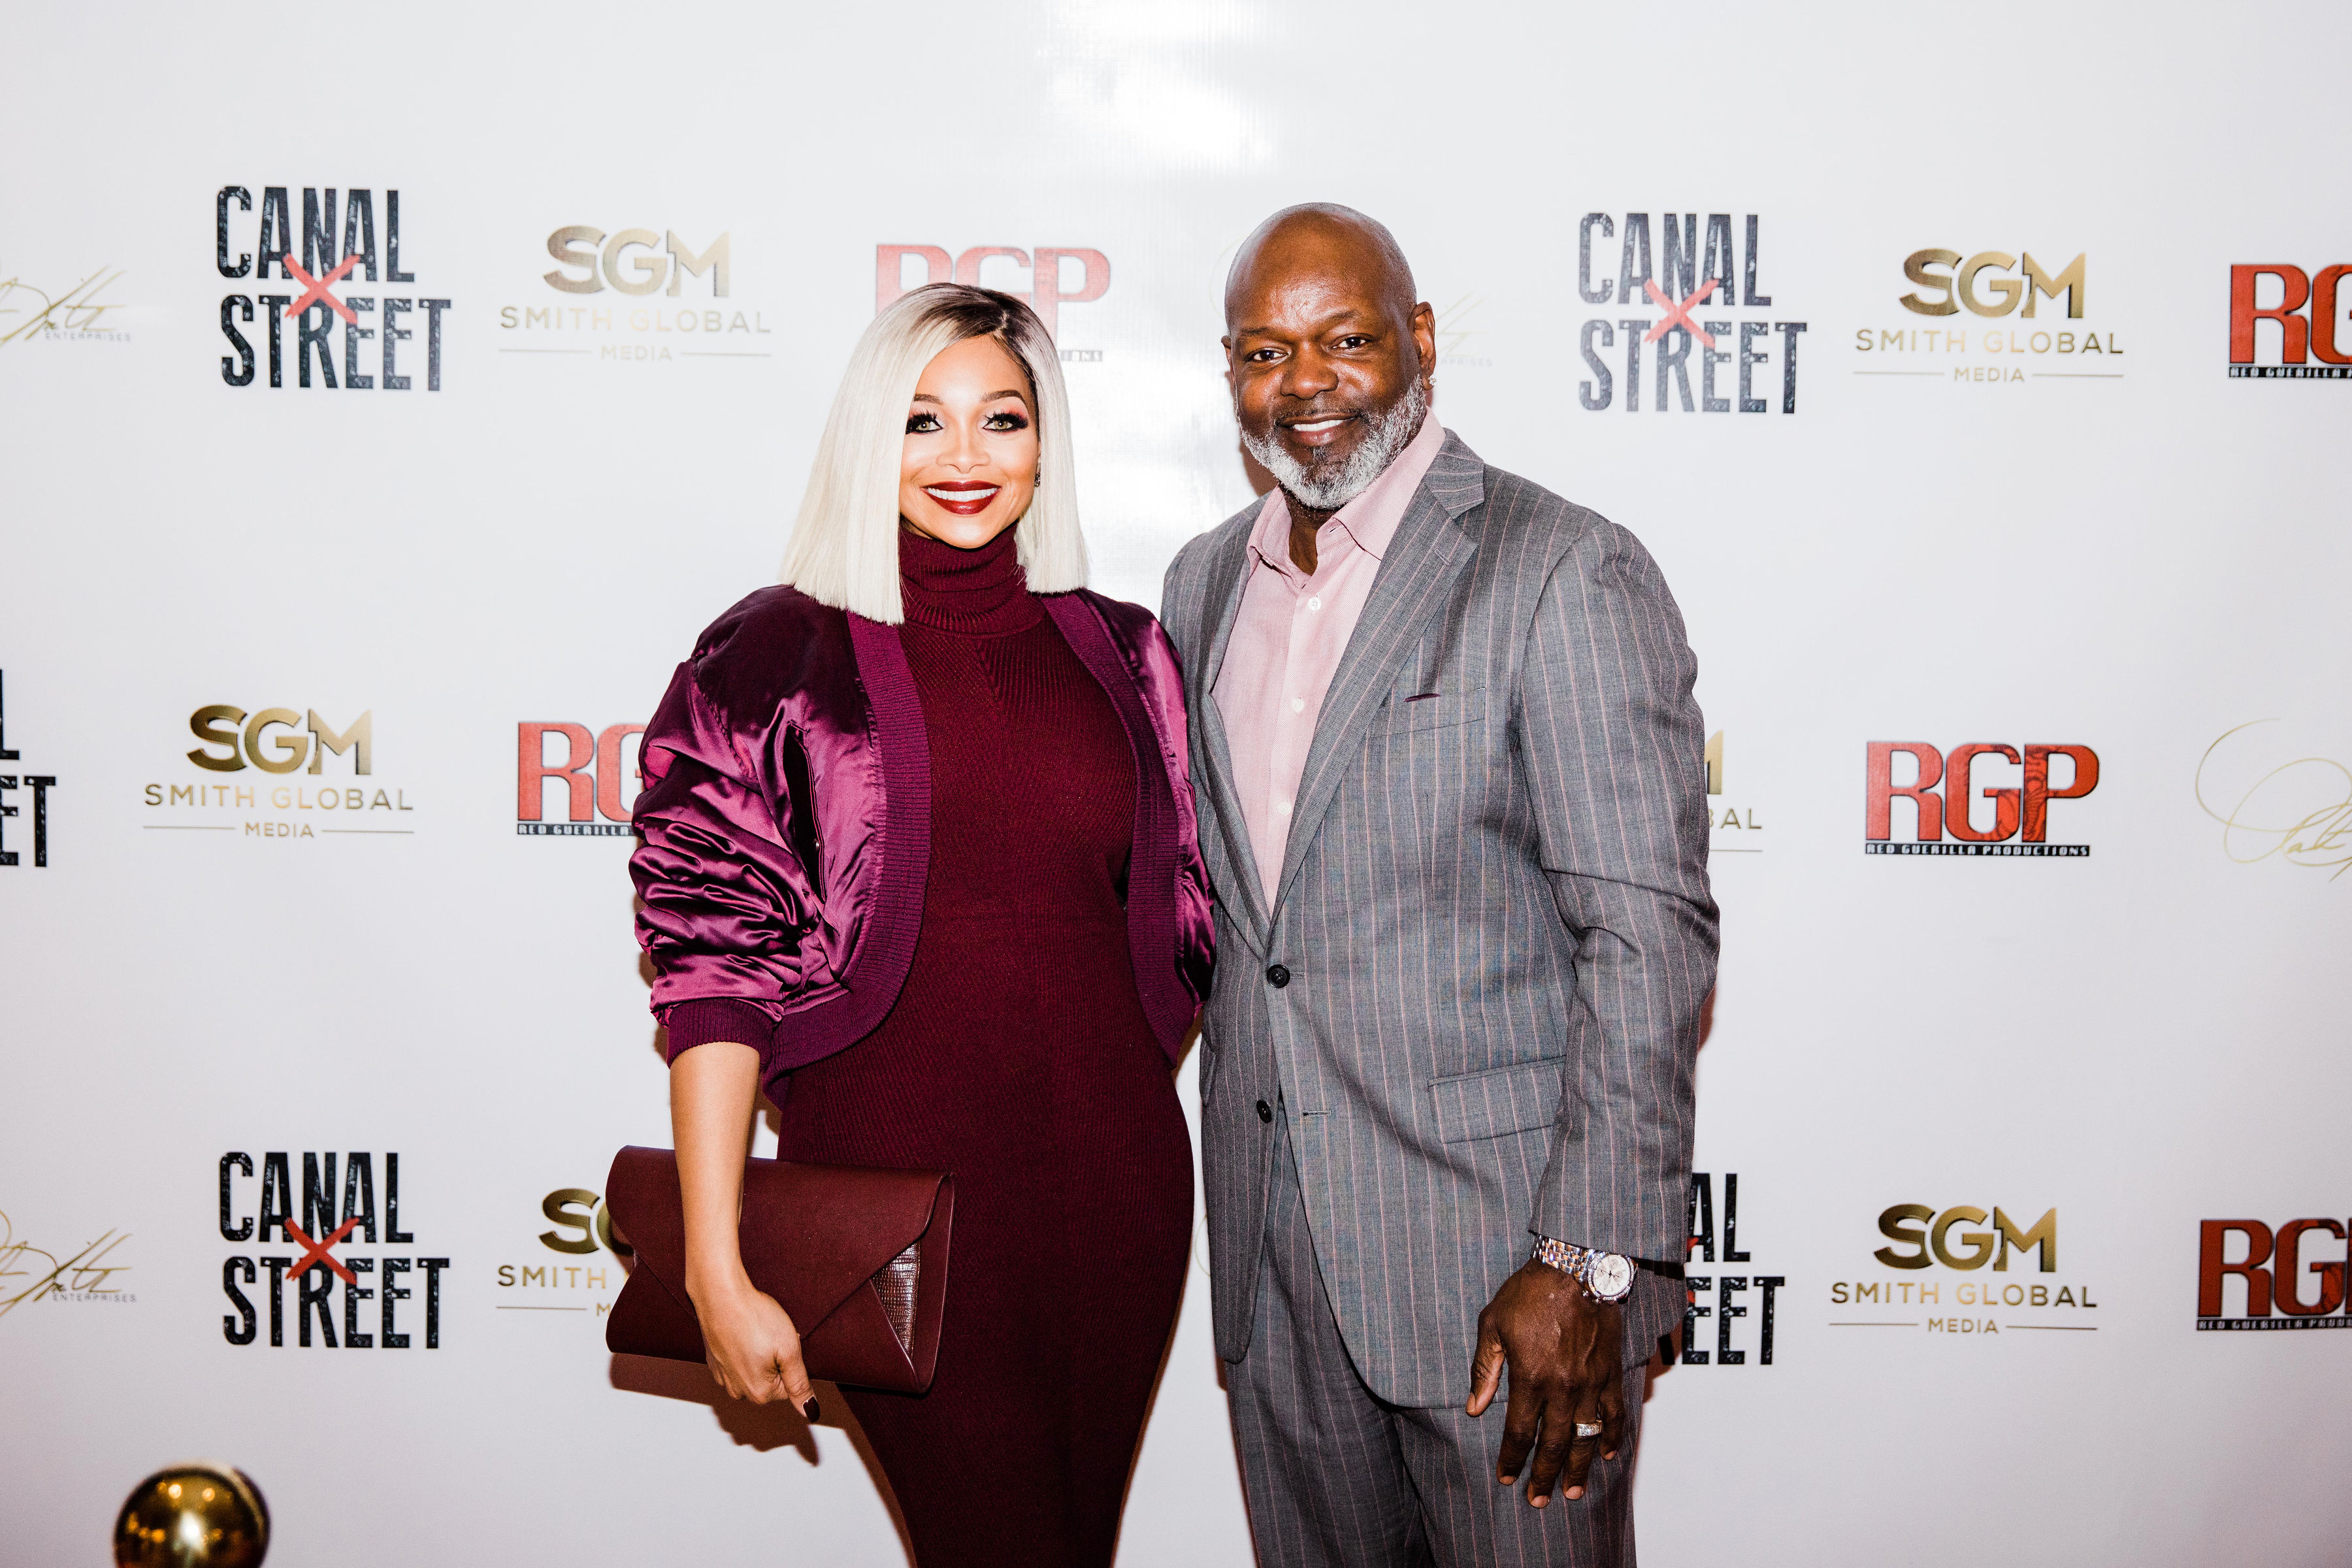 Canal Street Executive Producer Pat And Emmit Smith (Smith Global Media)